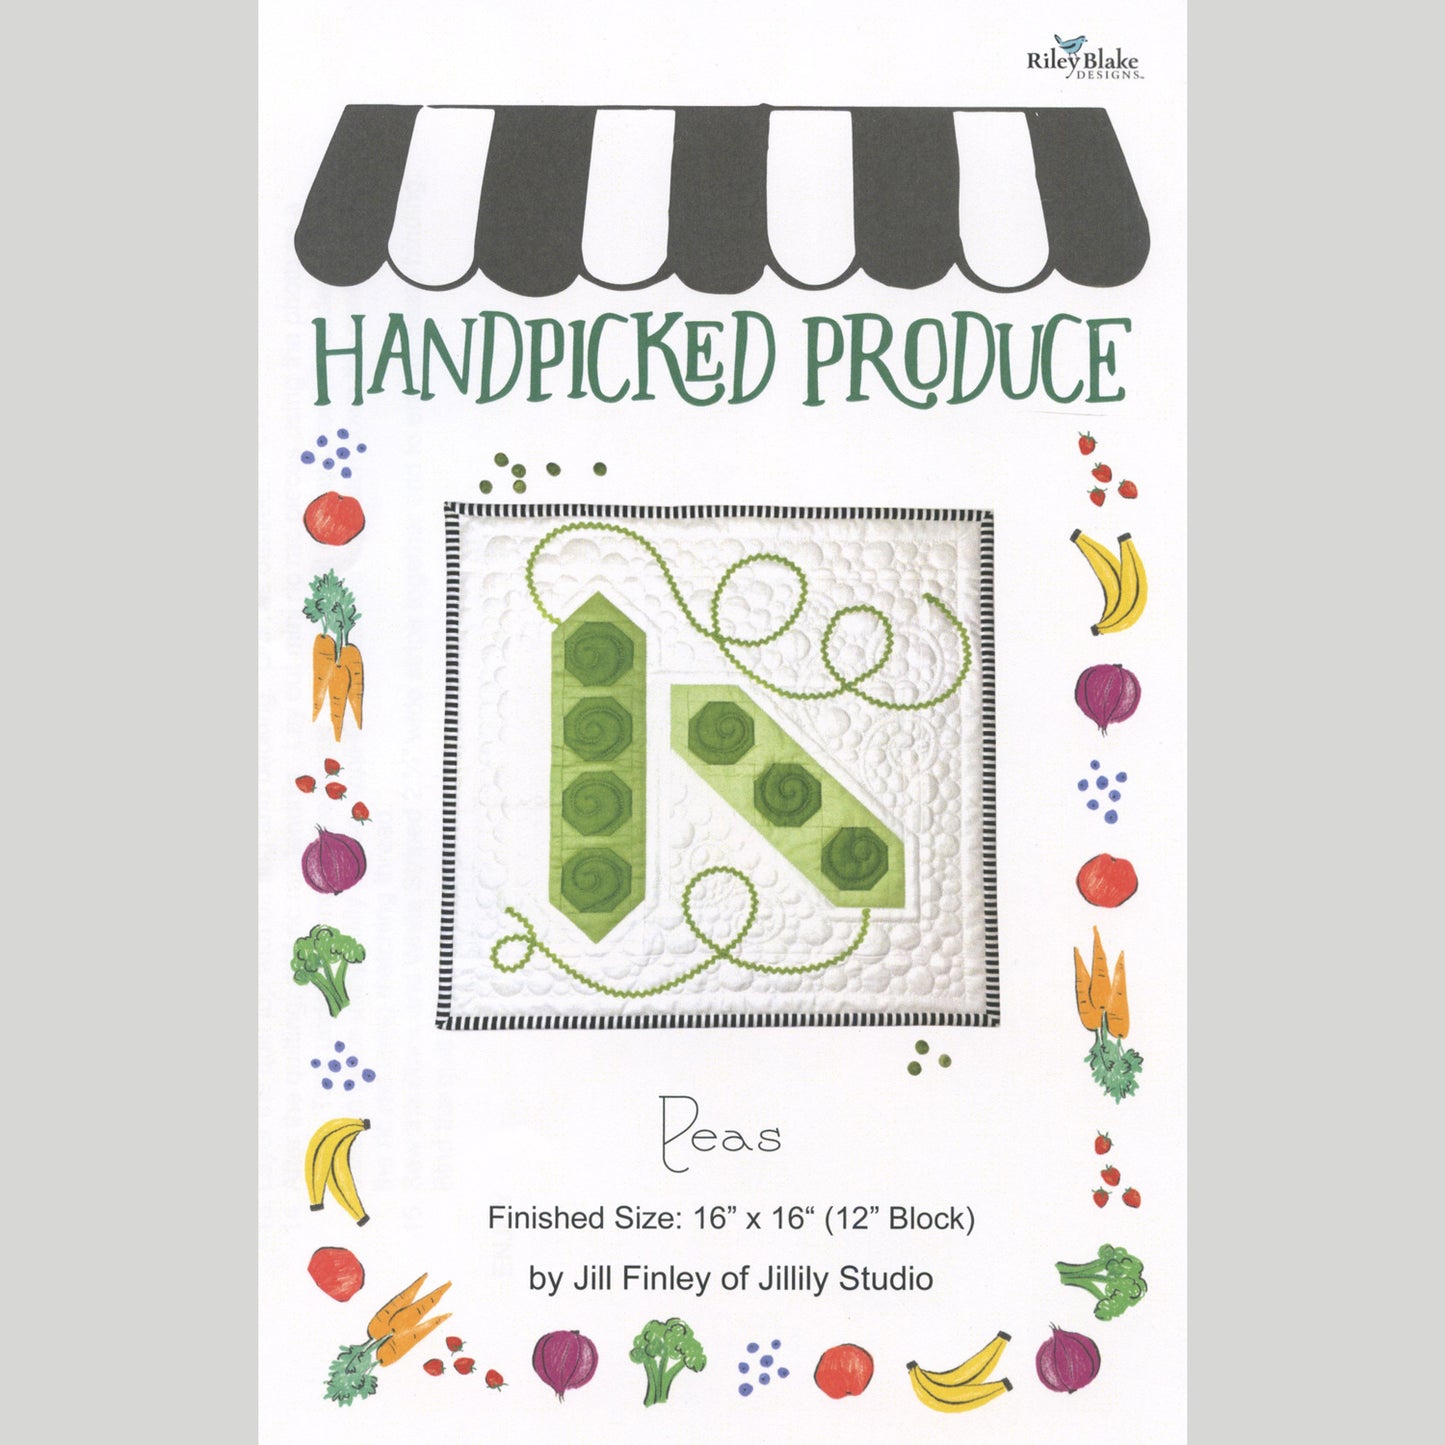 Handpicked Produce Quilt Pattern - Peas - FOR MARKET STORE & WEBSITE Primary Image